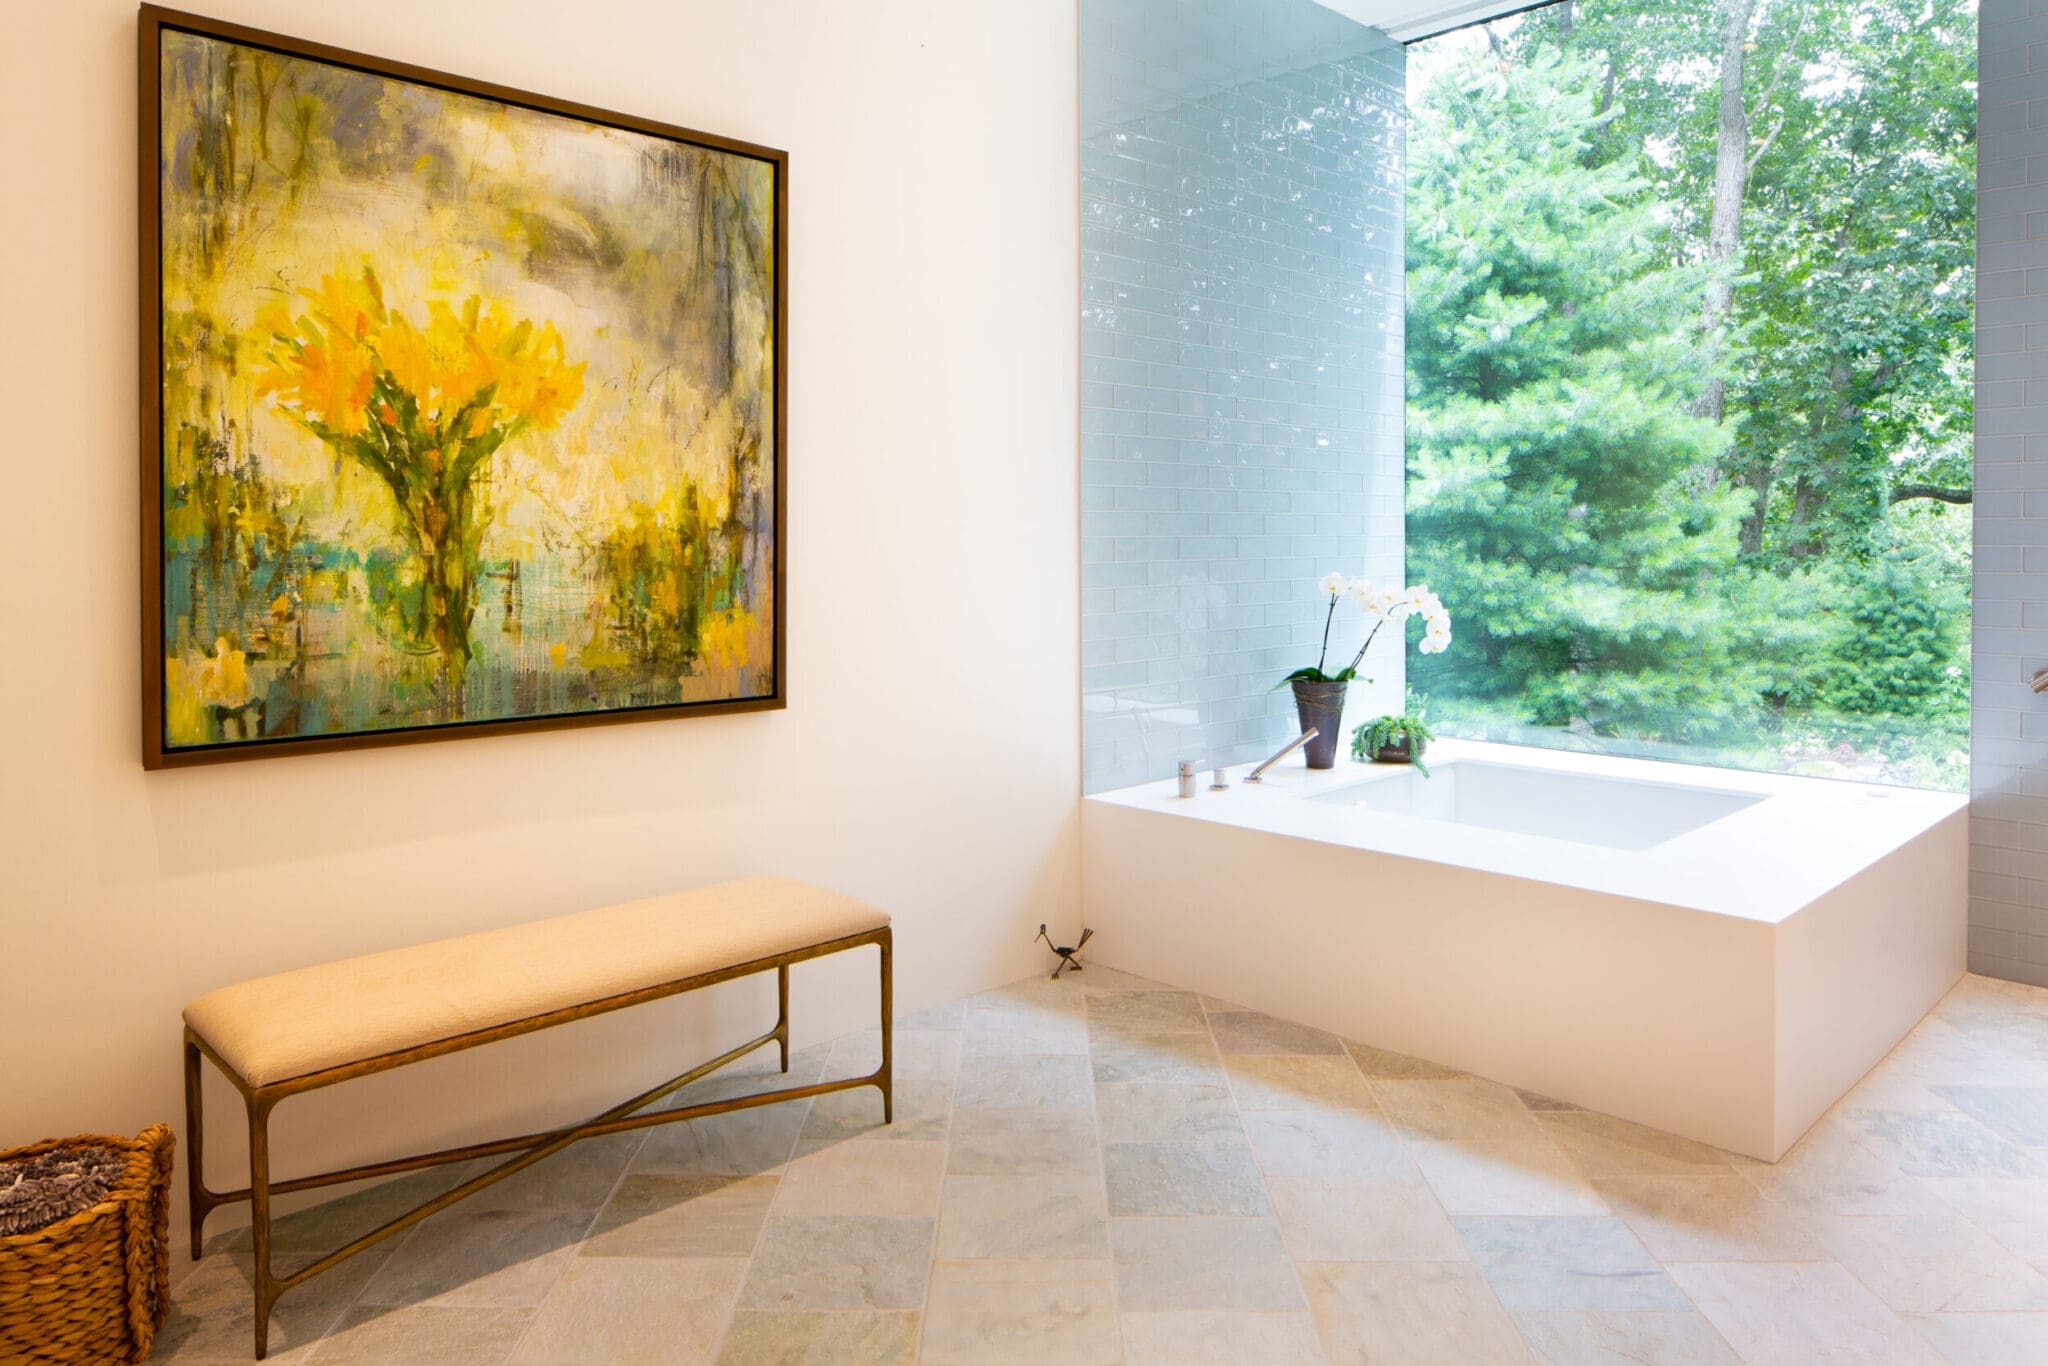 A photo of a bathroom with a large white square tub with light blue tiles on its walls and a ceiling-height window. To the left is a bench, towel basket, and a large framed painting of yellow flowers.